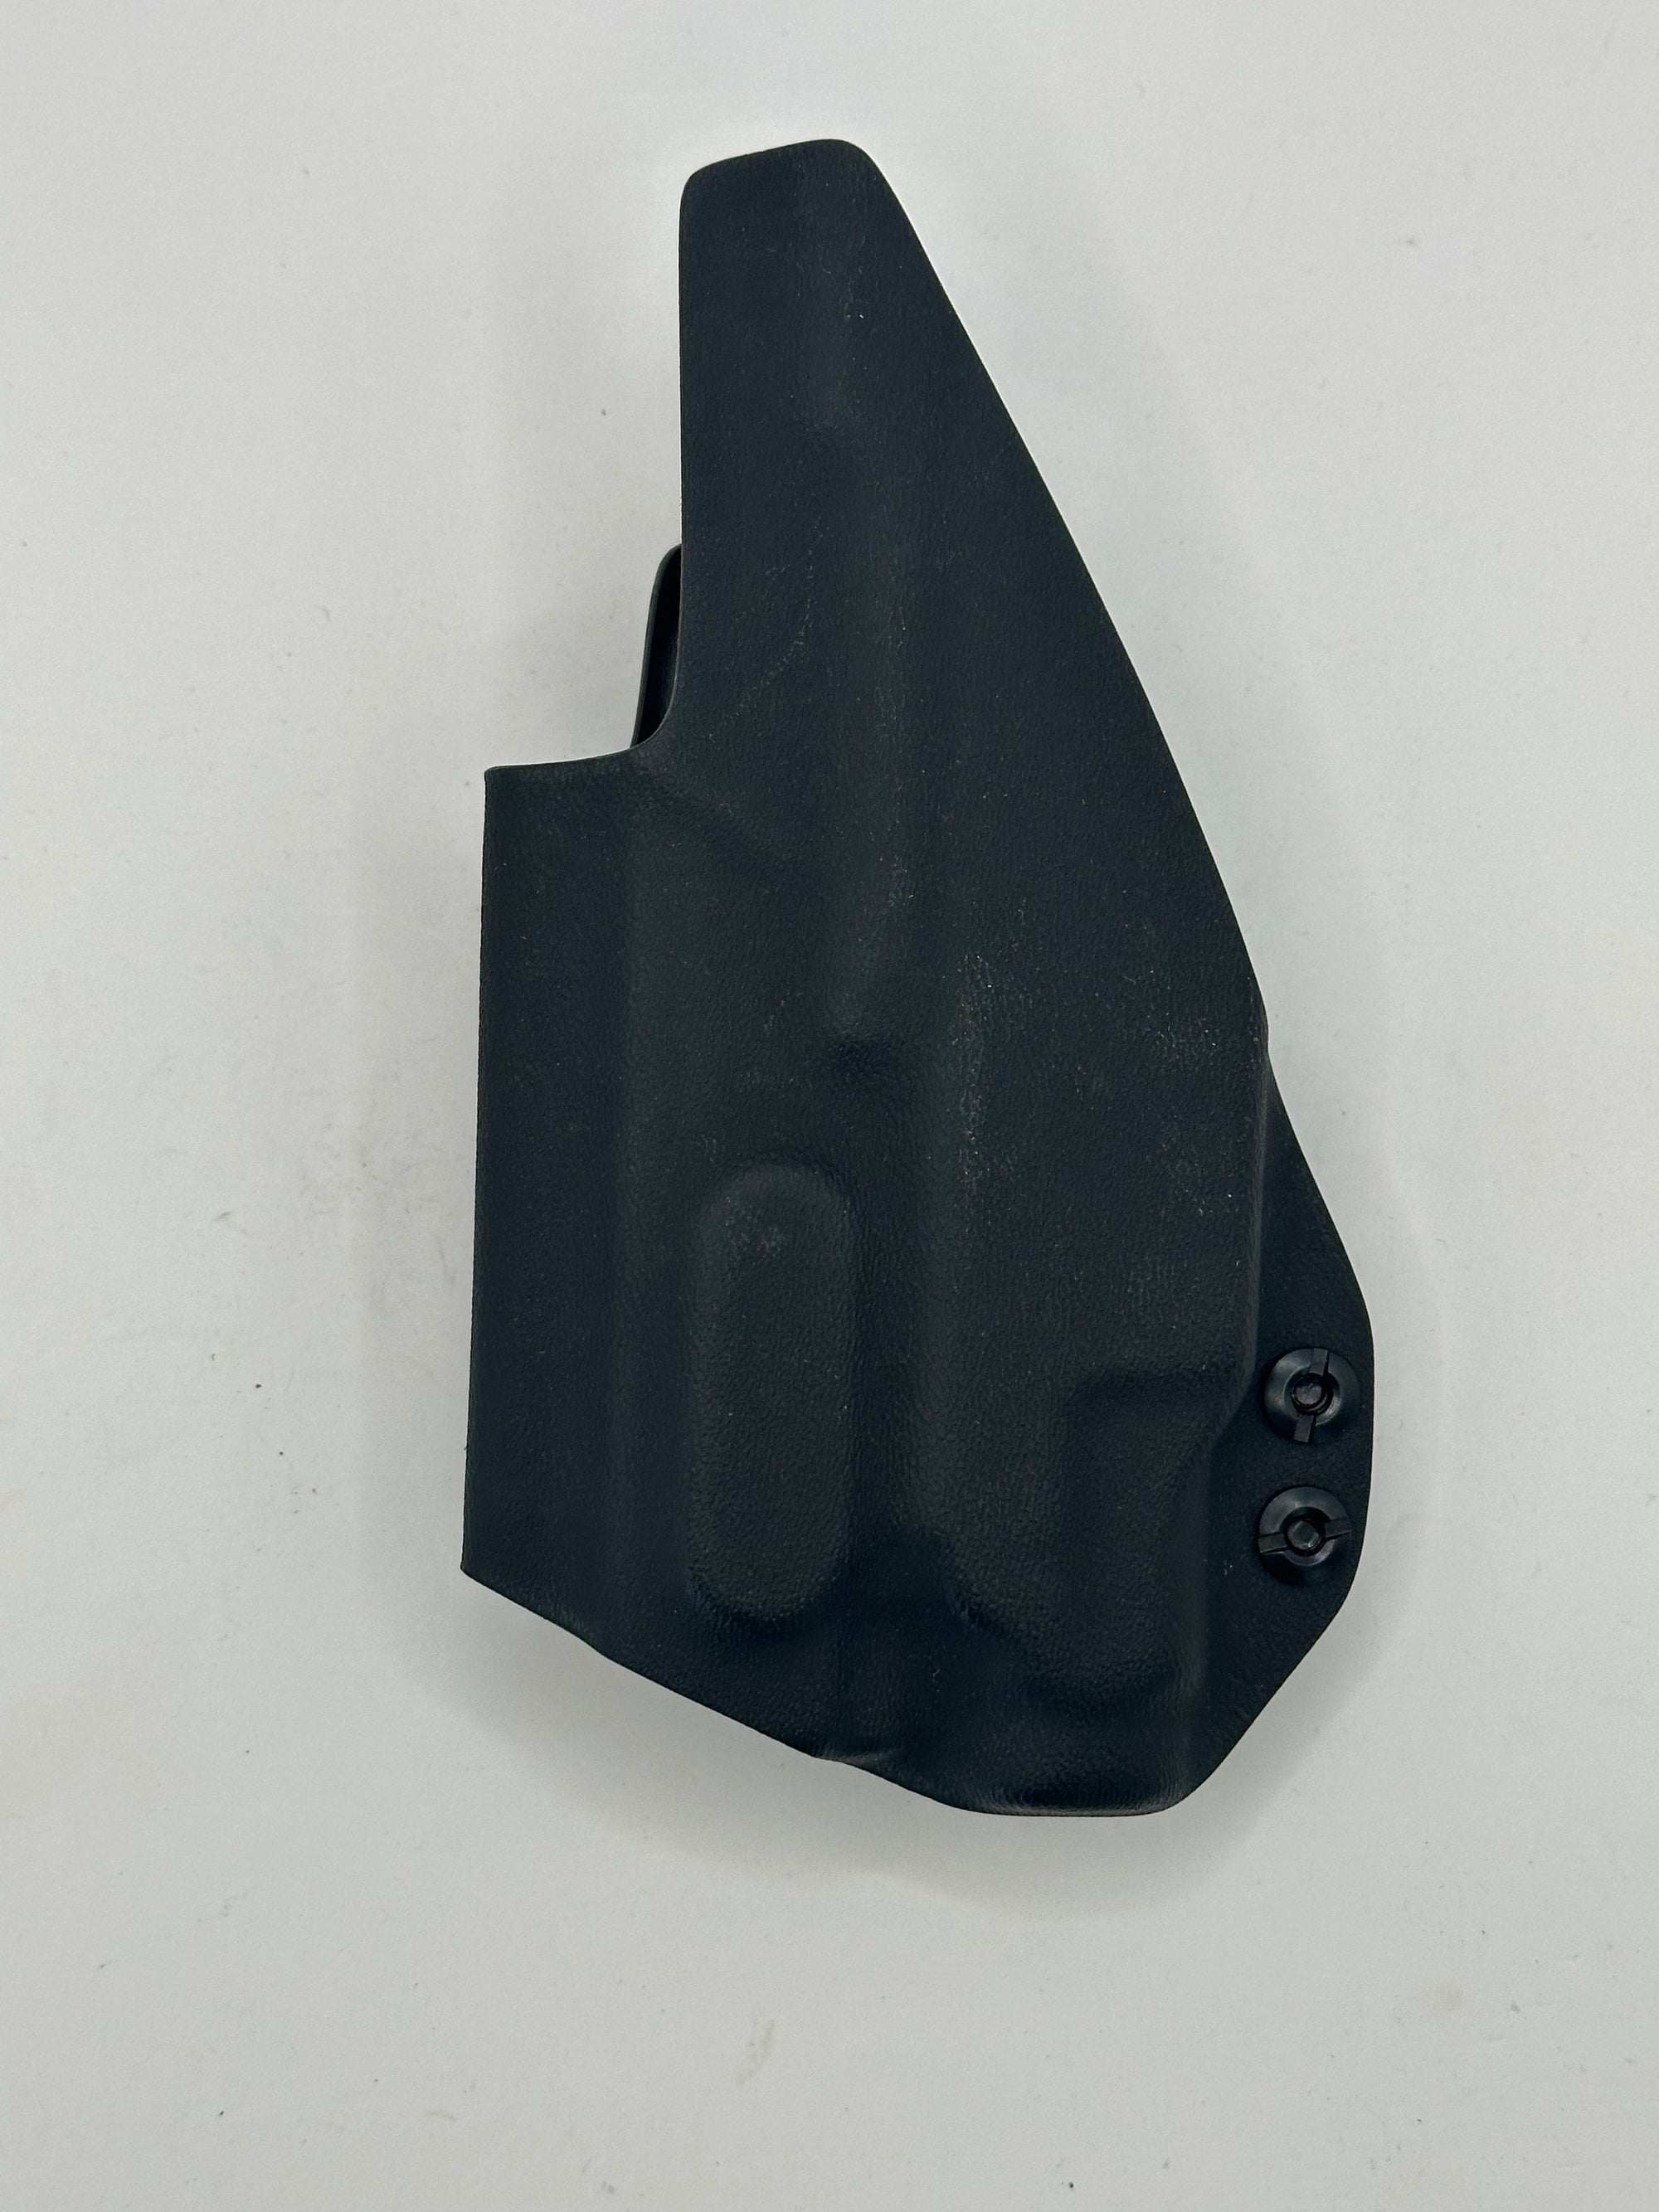 GS-31 Compatible with Sig Sauer P365 TLR7 / TLR 7 sub -  IWB Sirius Lighted Holster  - Black